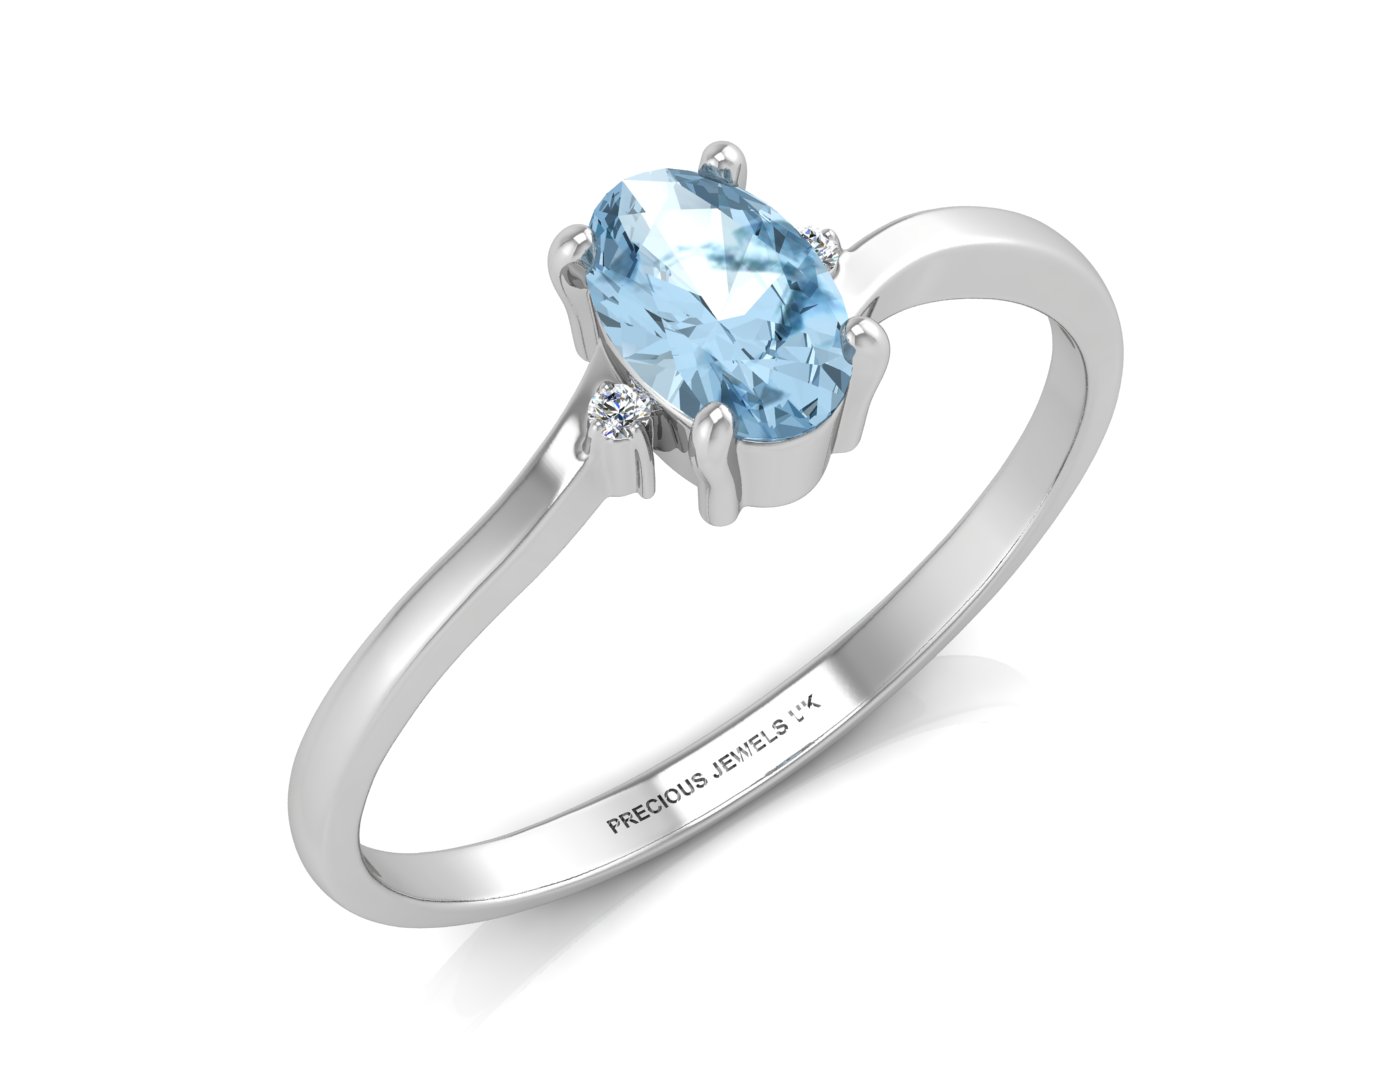 9ct White Gold Diamond and Oval Shape Blue Topaz Ring - Image 3 of 8